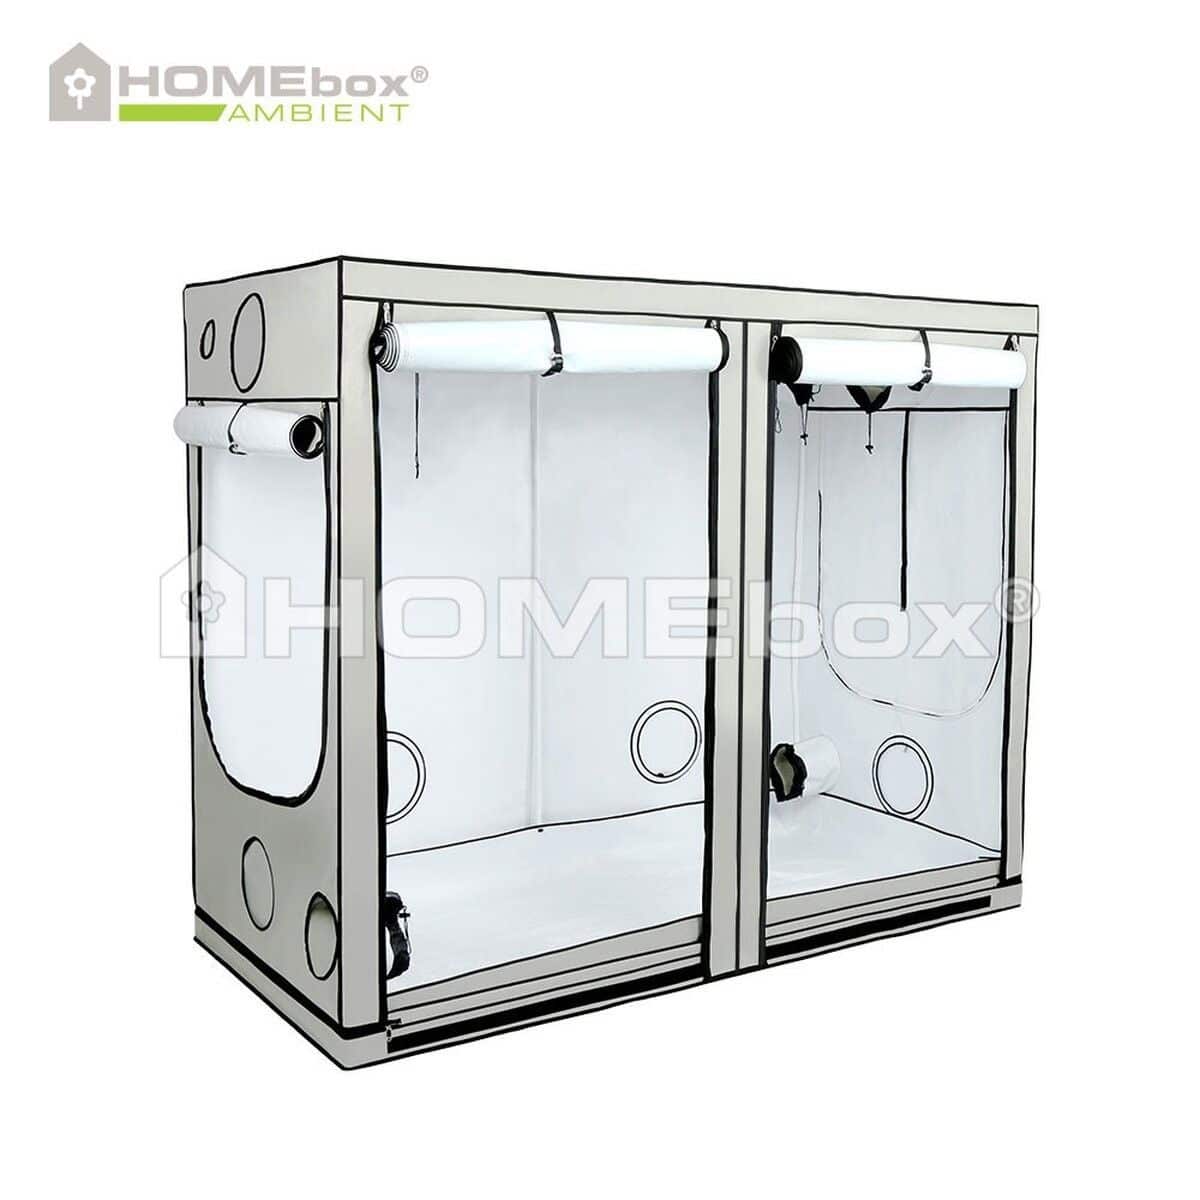 HB Home box ambient r240 doors